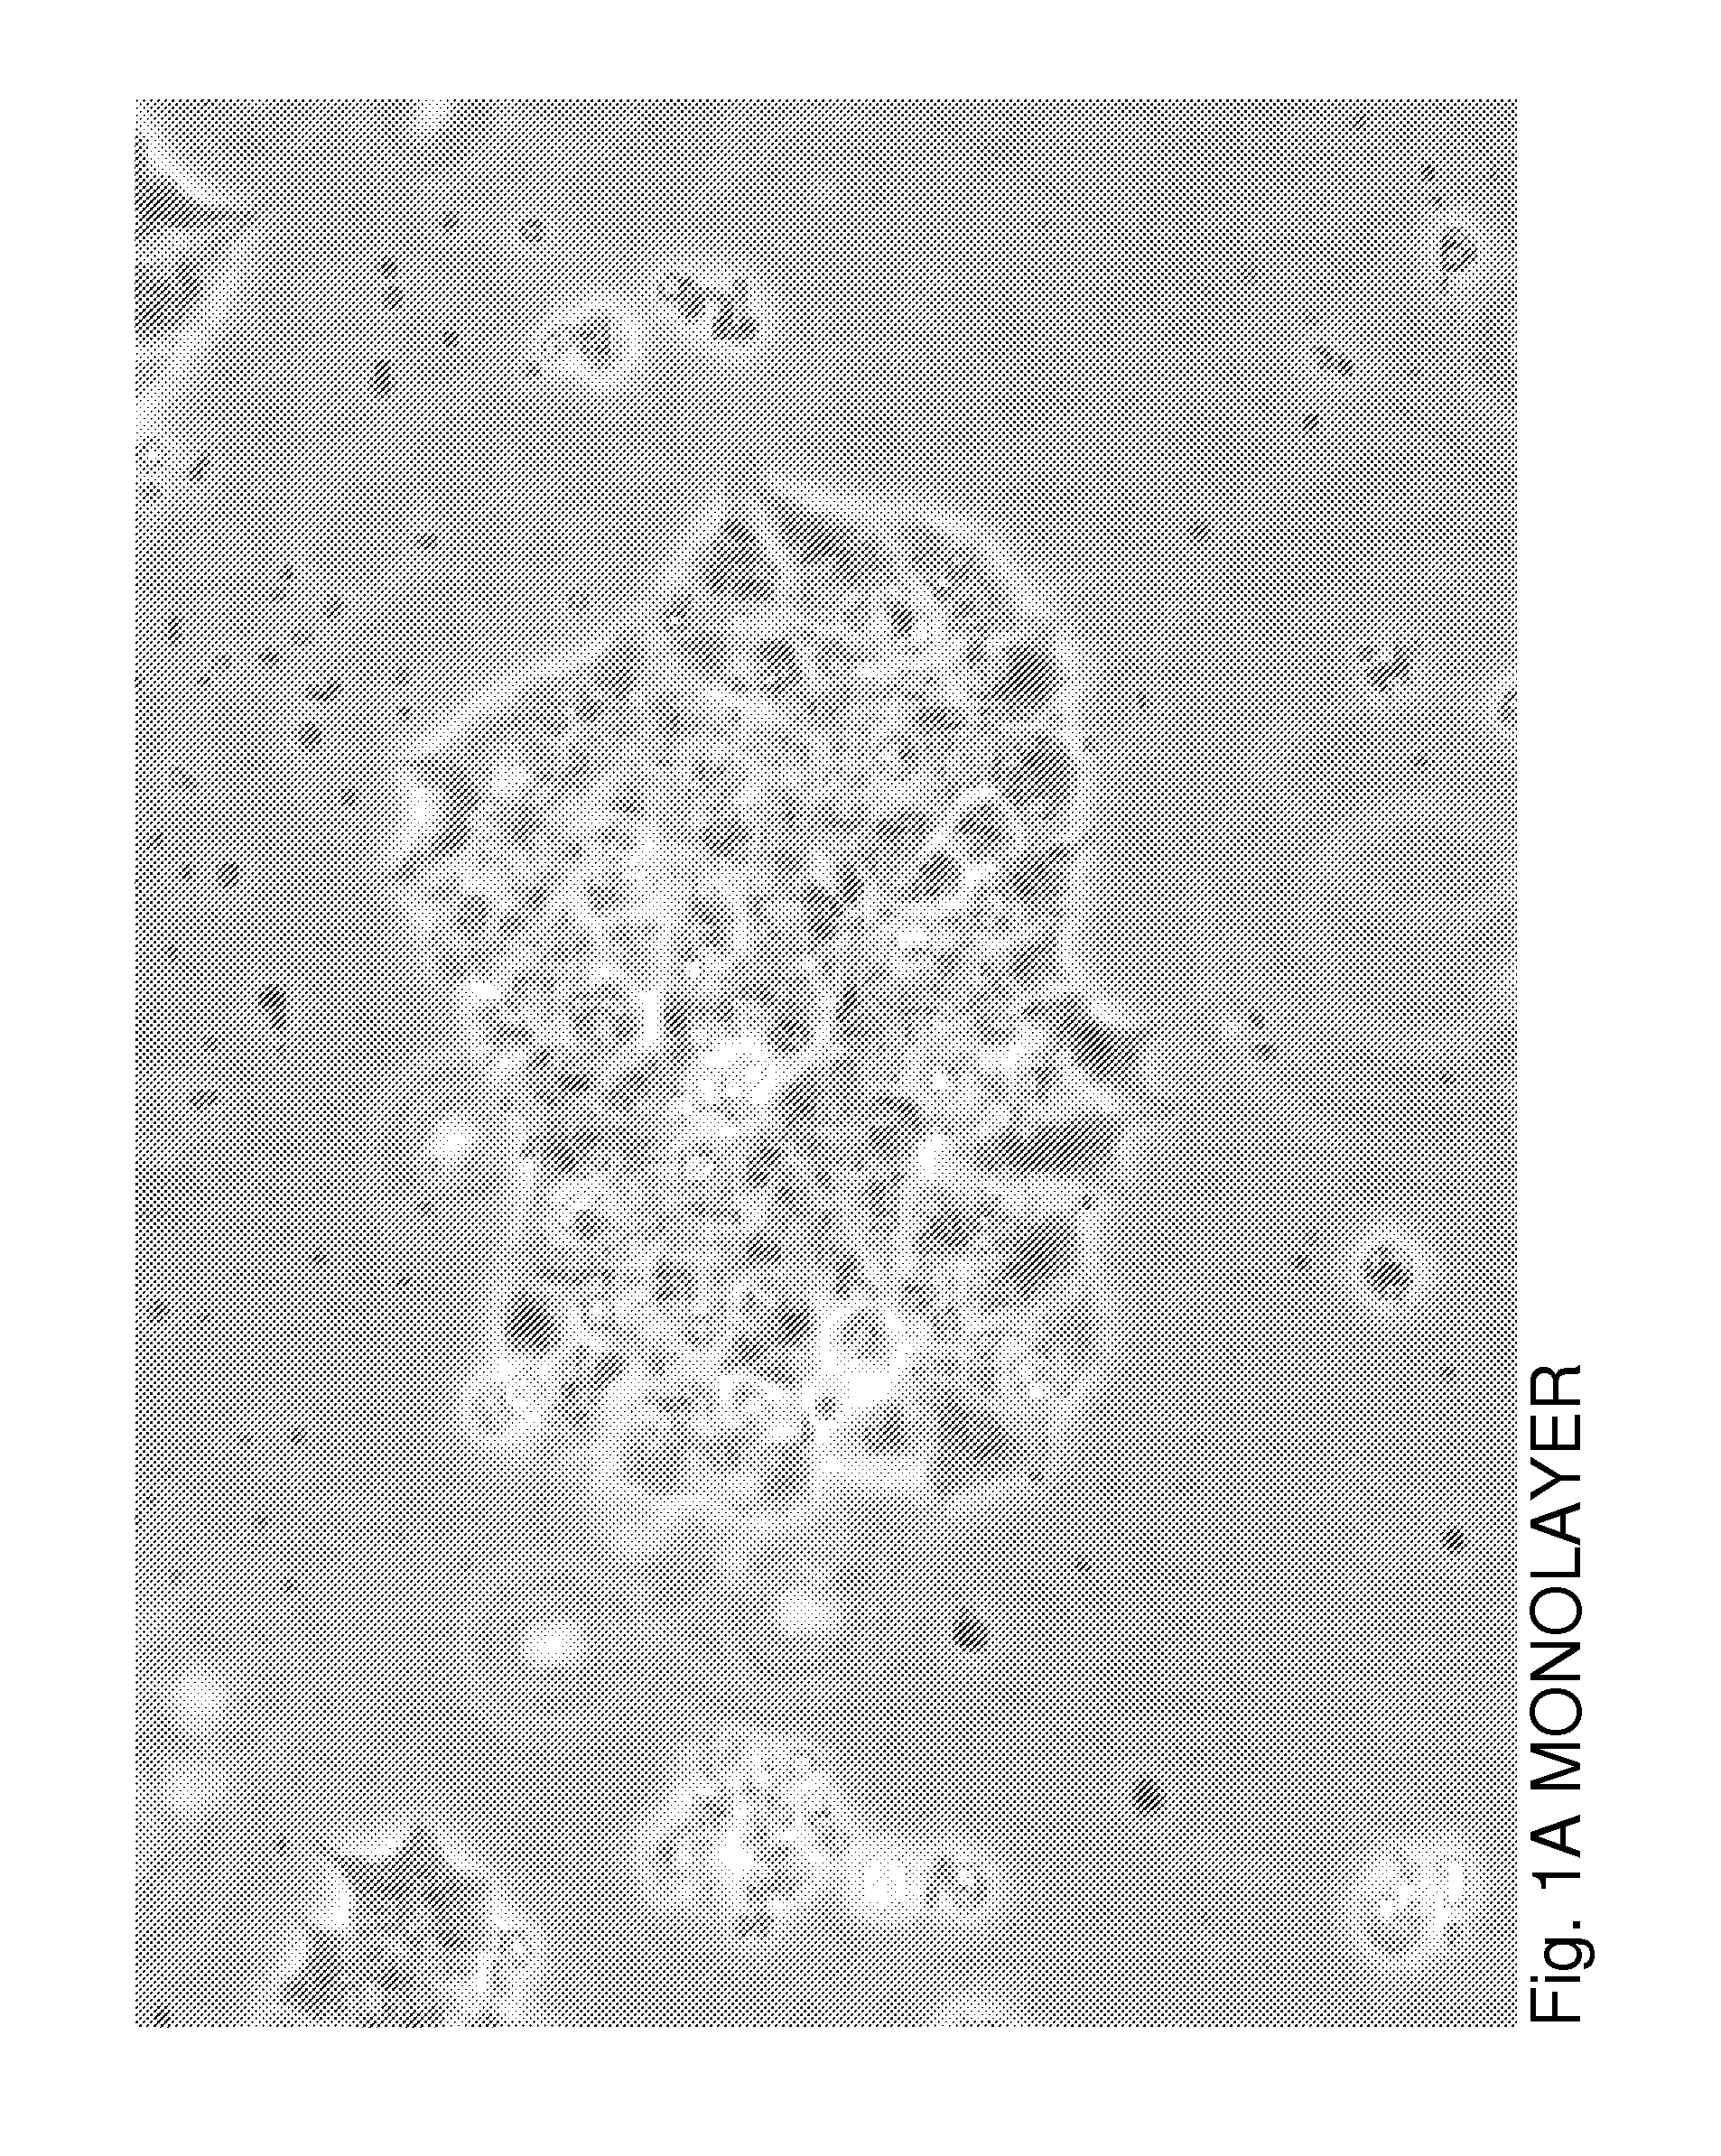 Method for inducing the formation of islet structures and improving beta cell function